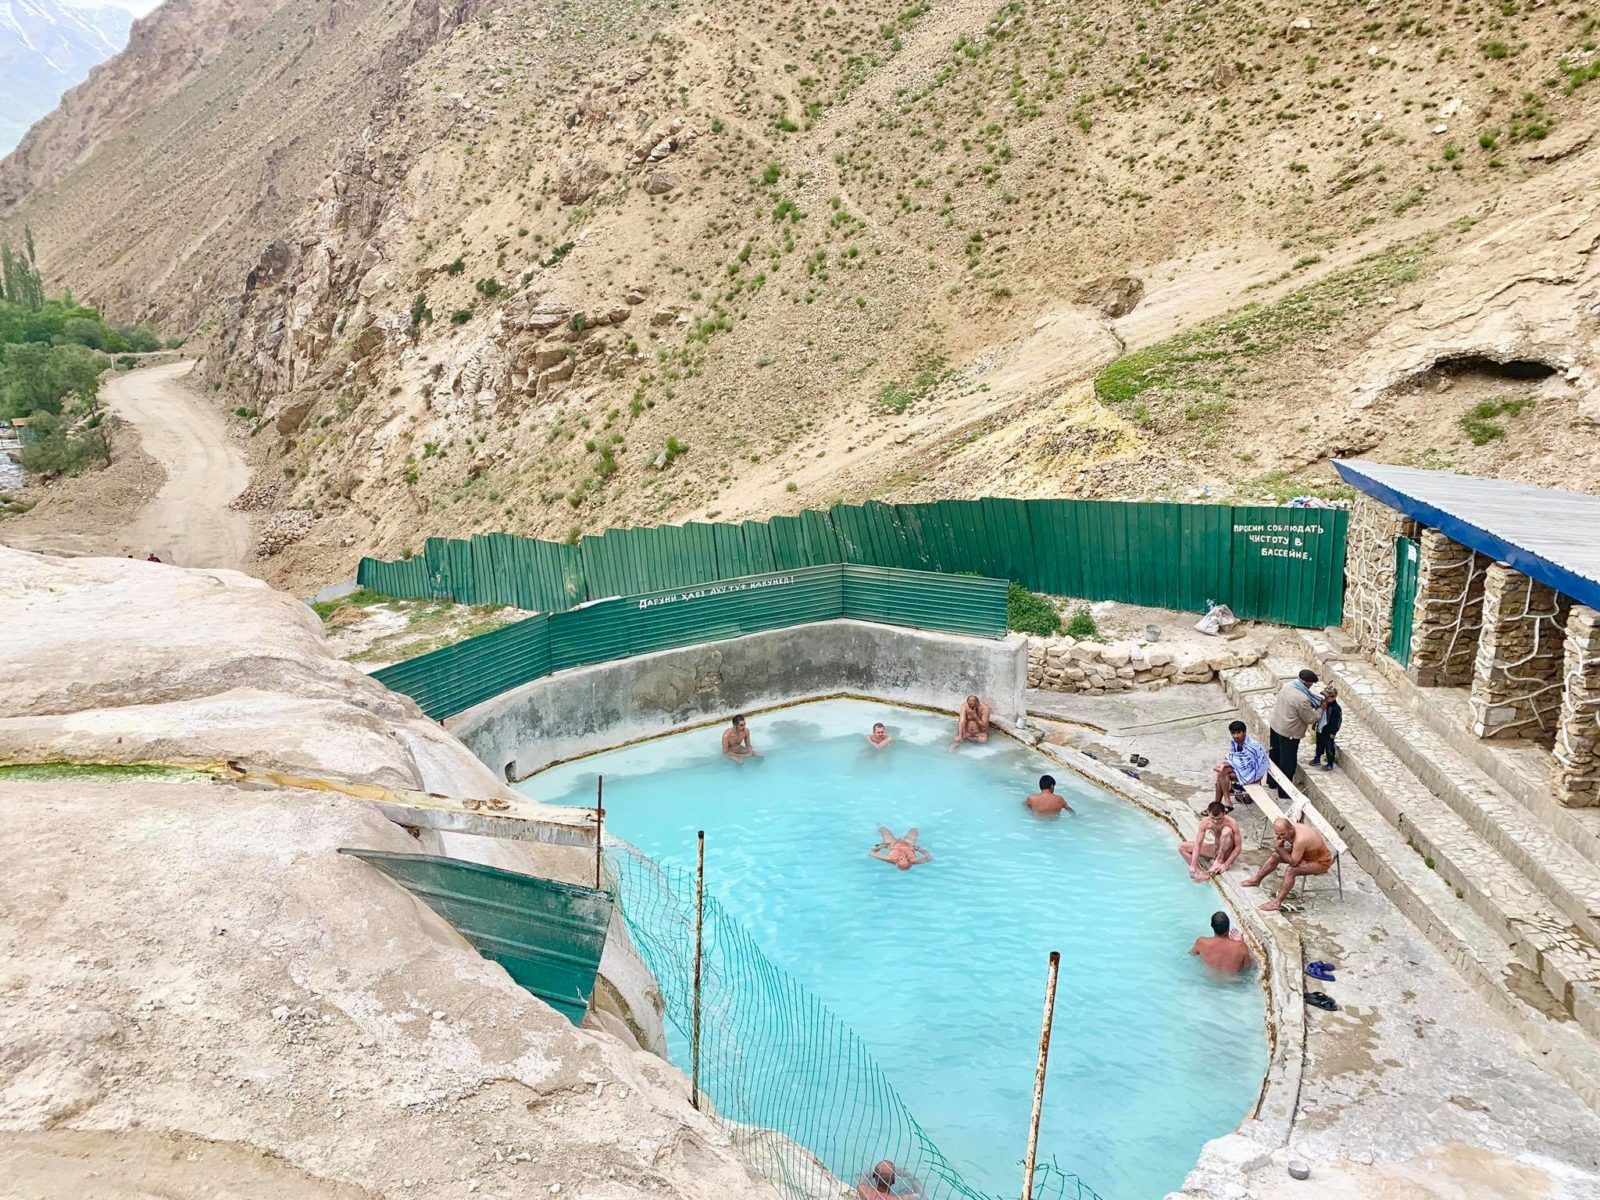 13 Things You Should Not Miss When You Travel the Pamir Highway in Tajikistan